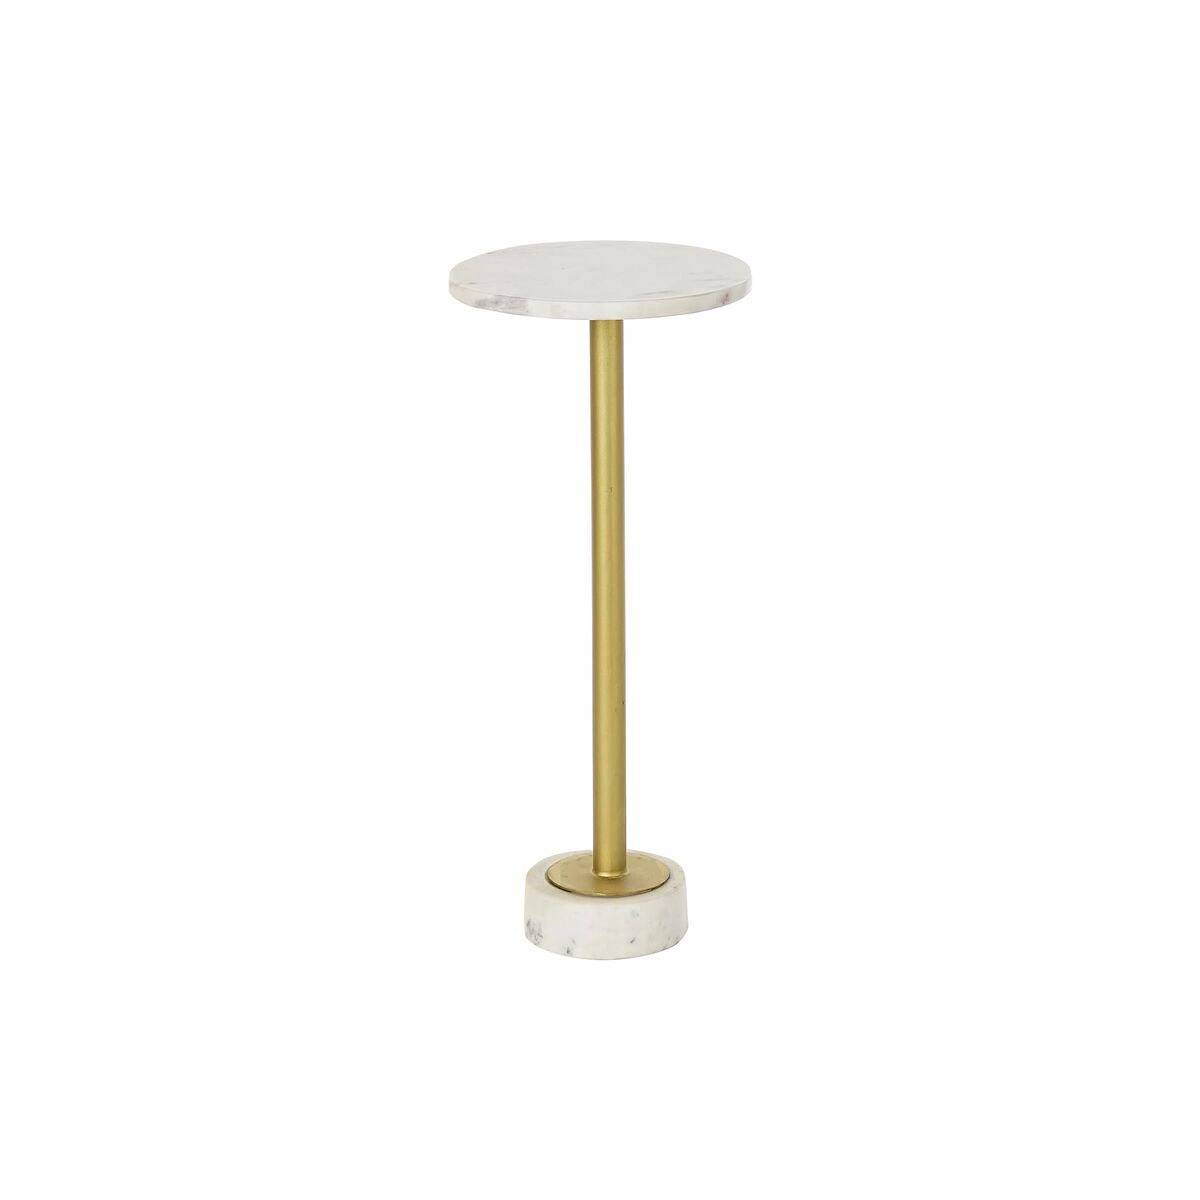 Side table in Marble and Golden Metal (27 x 27 x 62 cm)